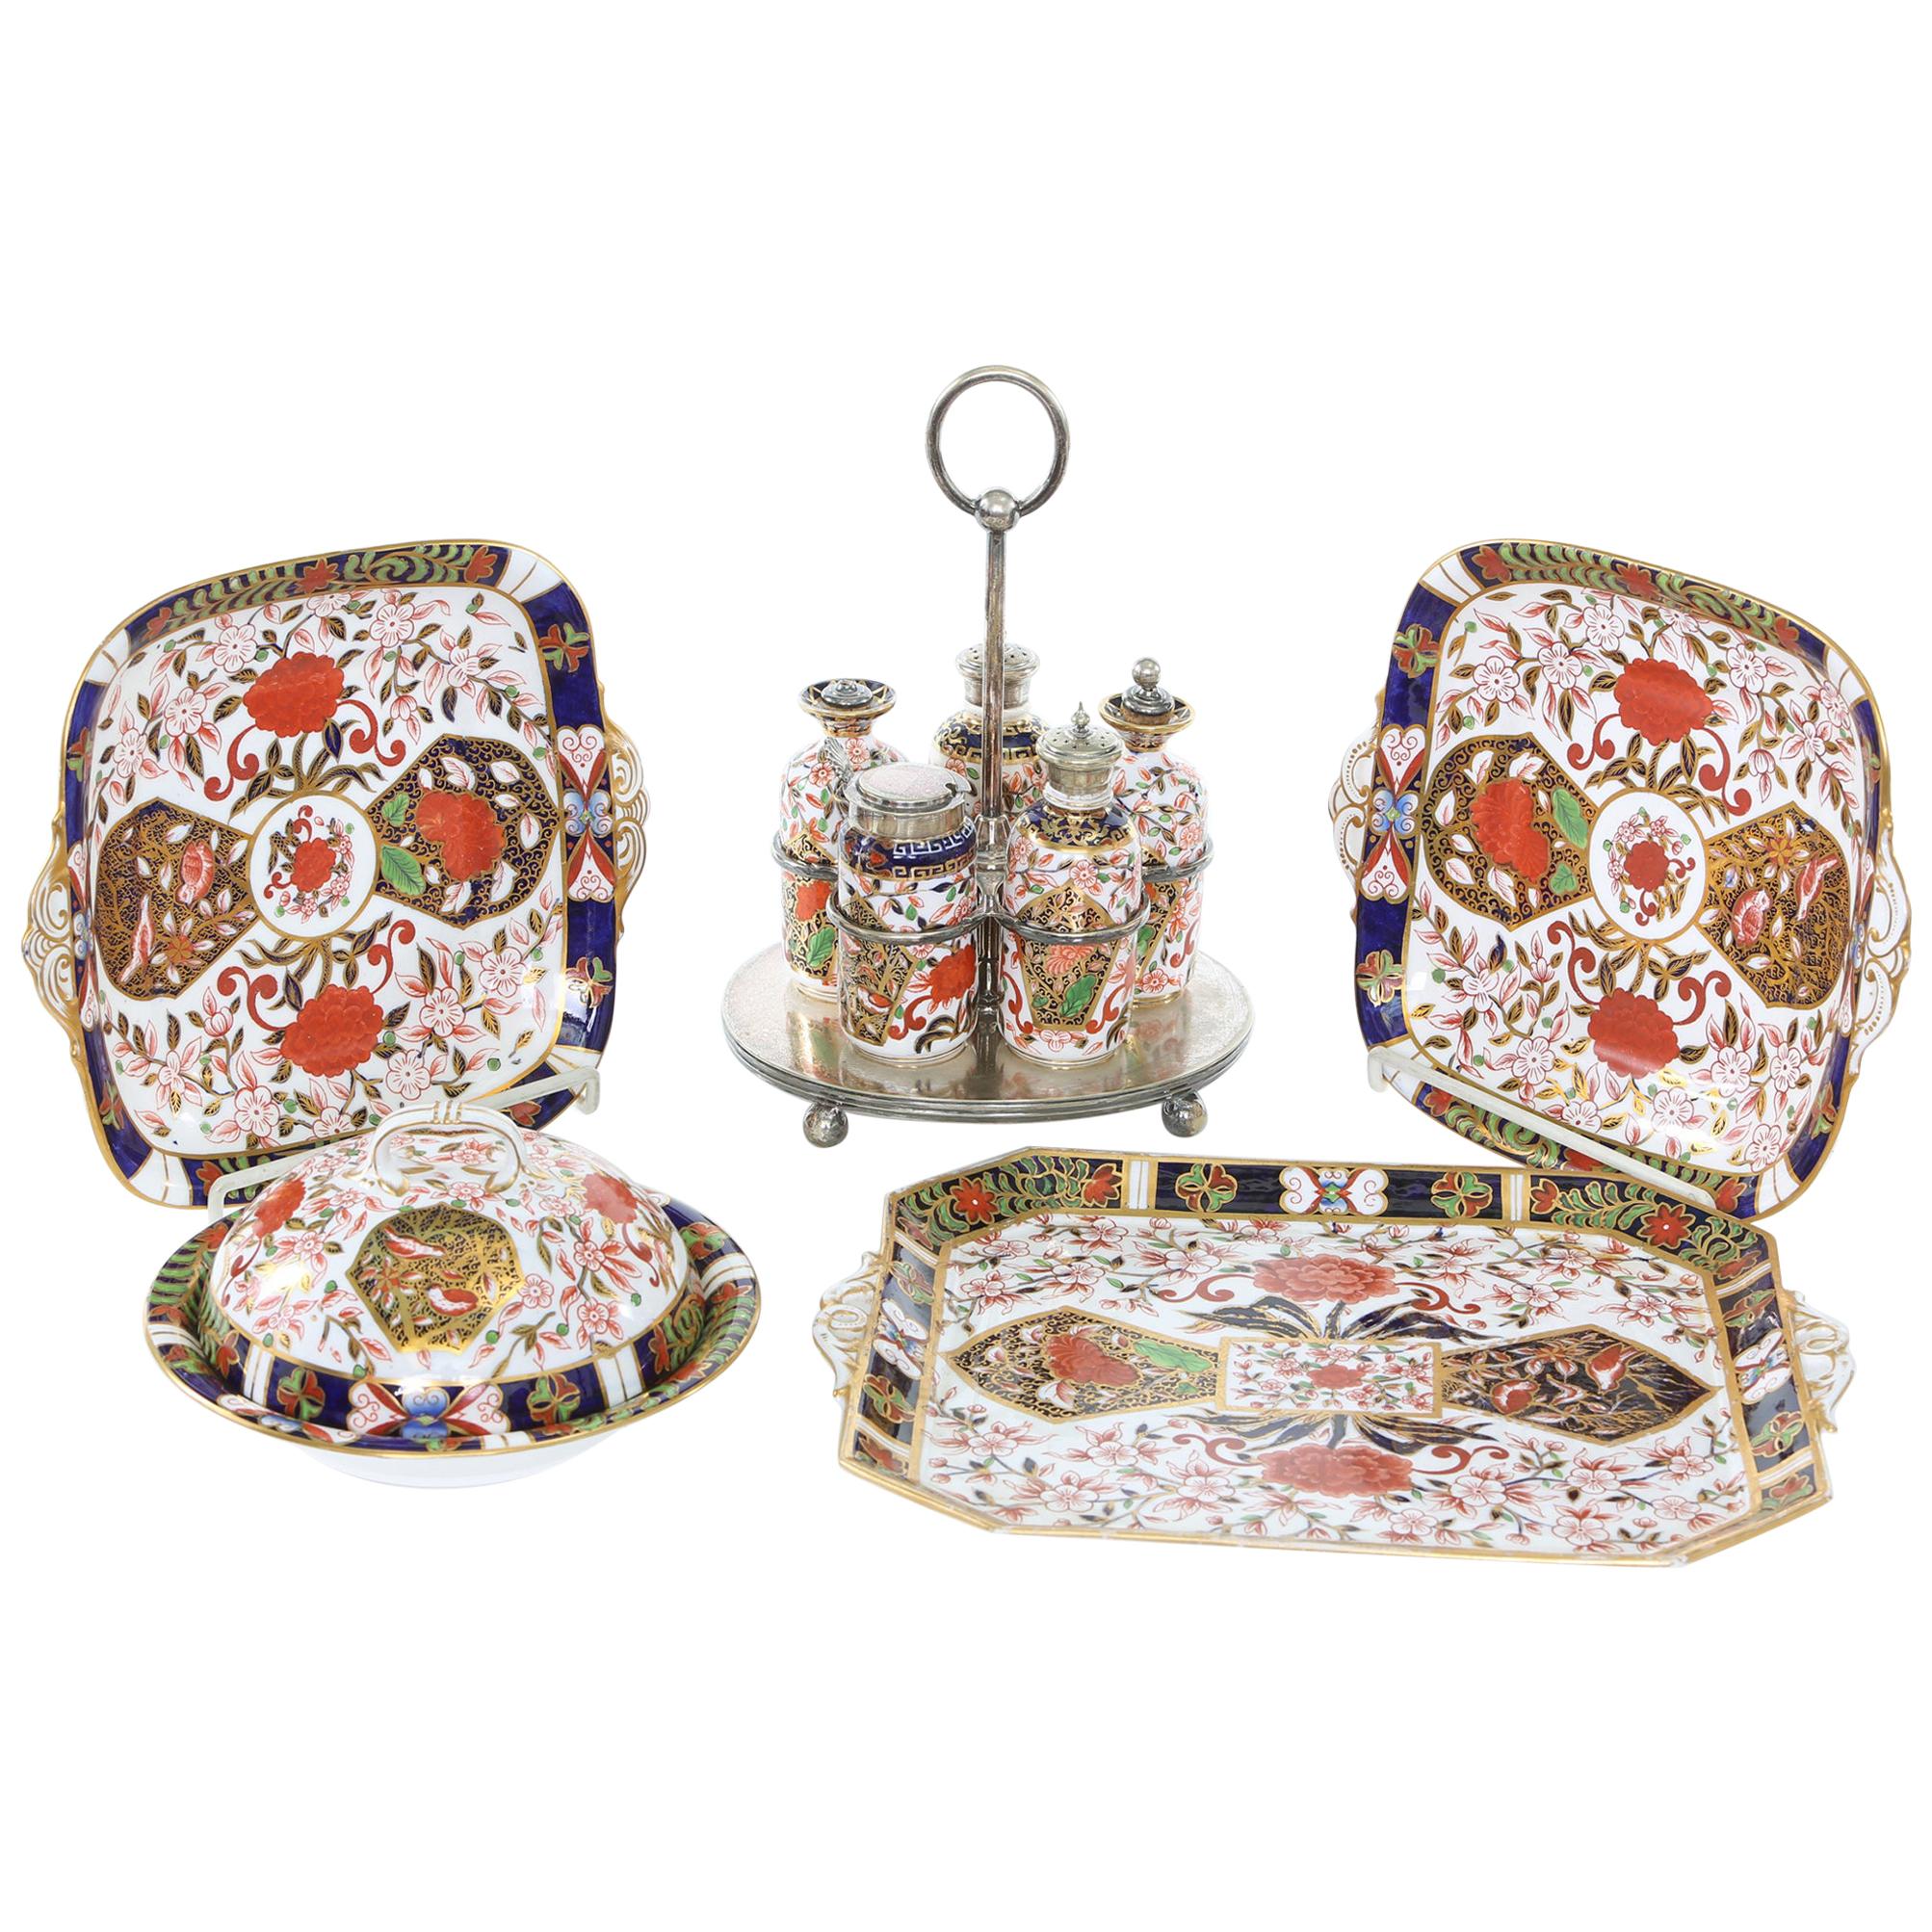 19th Century English Royal Crown Derby Serving Pieces